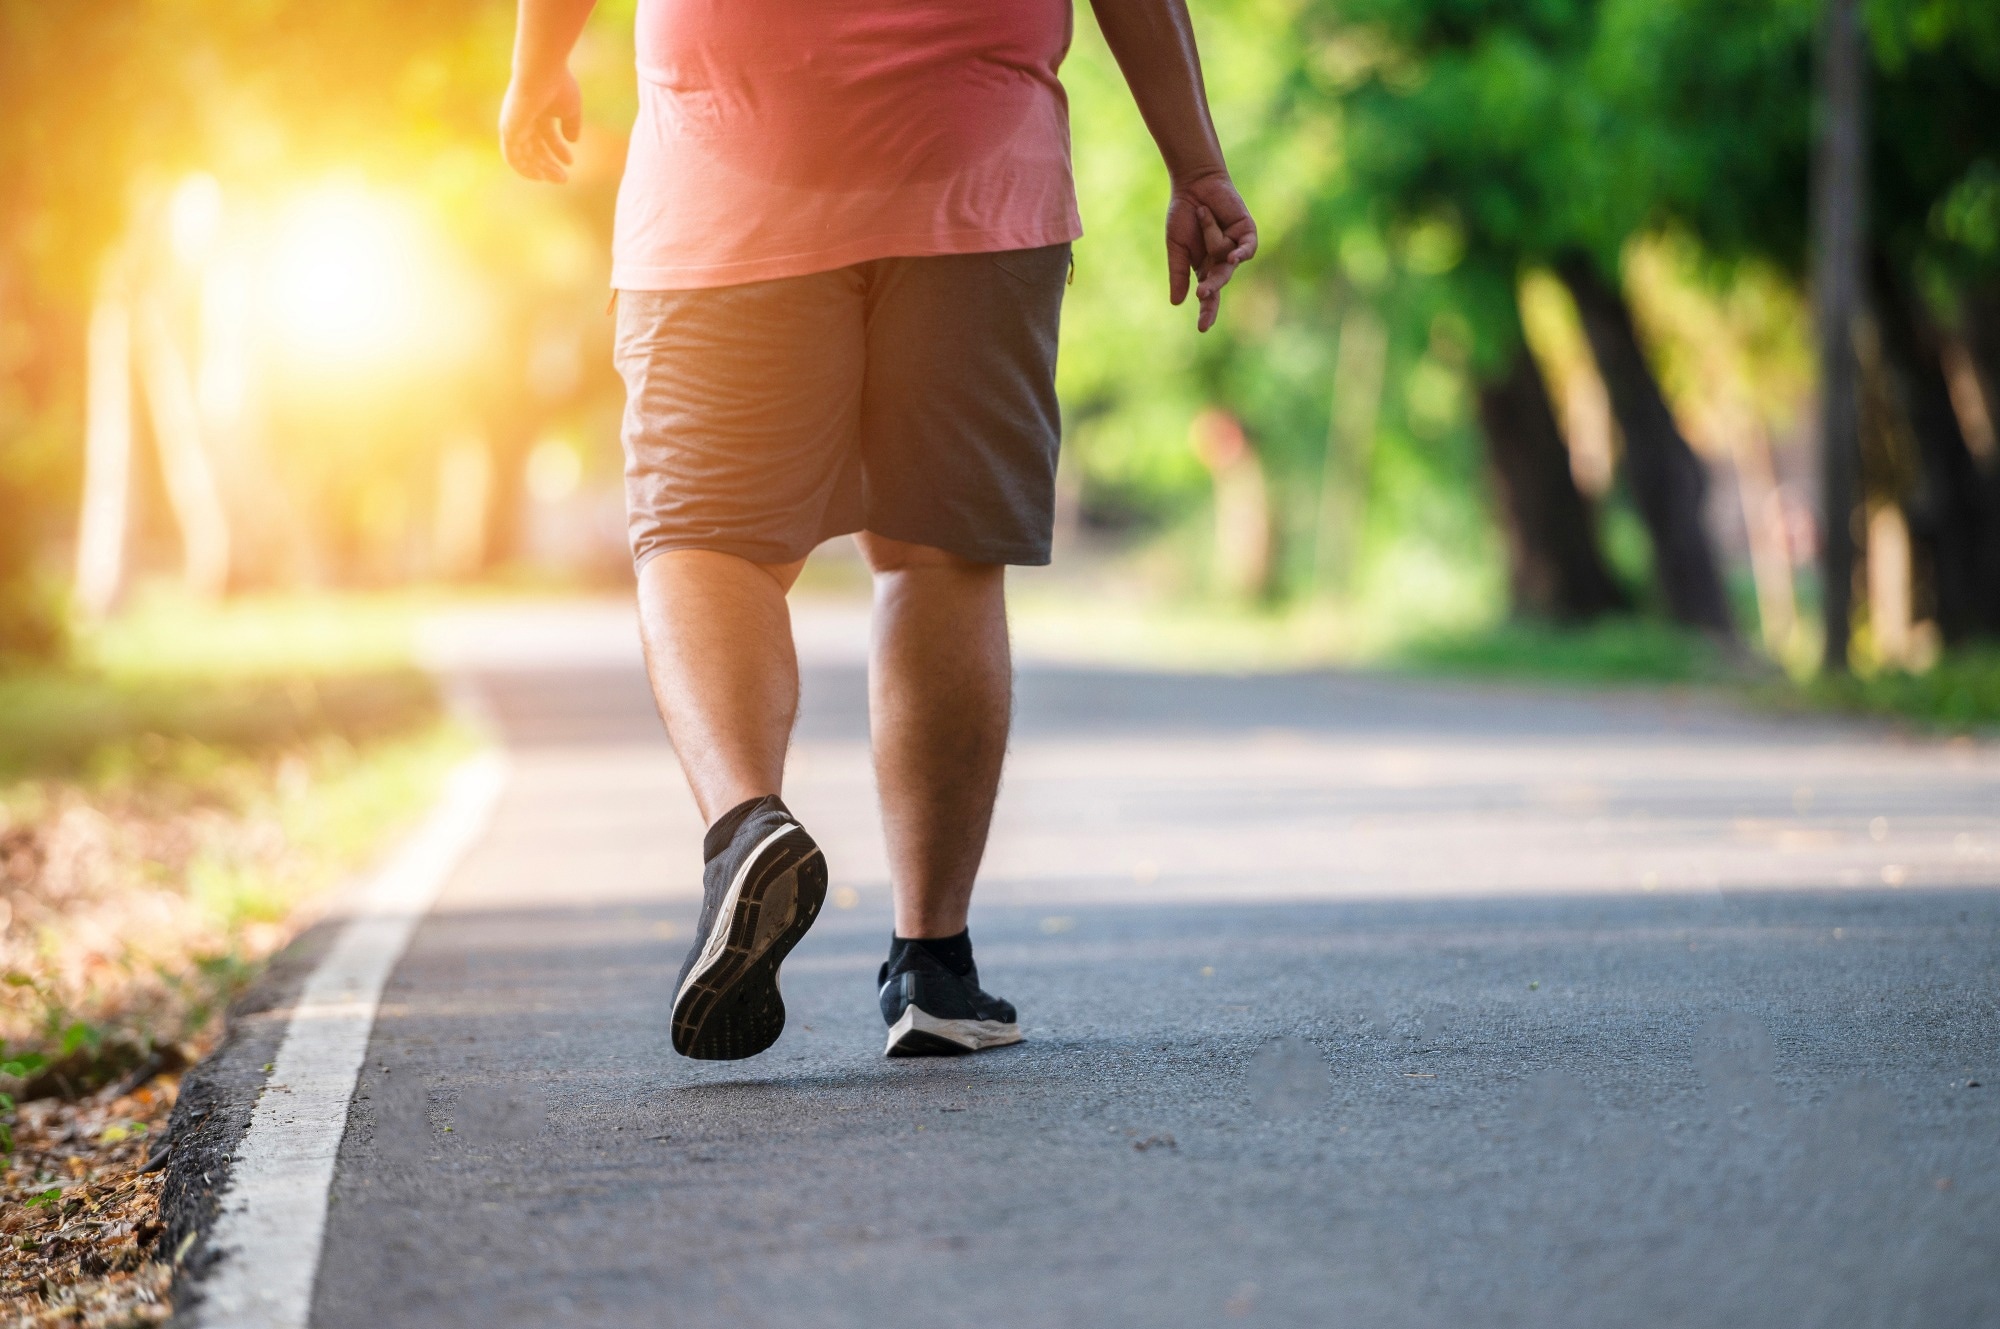 Study: Integrated genetic and epigenetic analyses uncovered GLP1R association with metabolically healthy obesity. Image Credit: Somchai_shock / Shutterstock.com